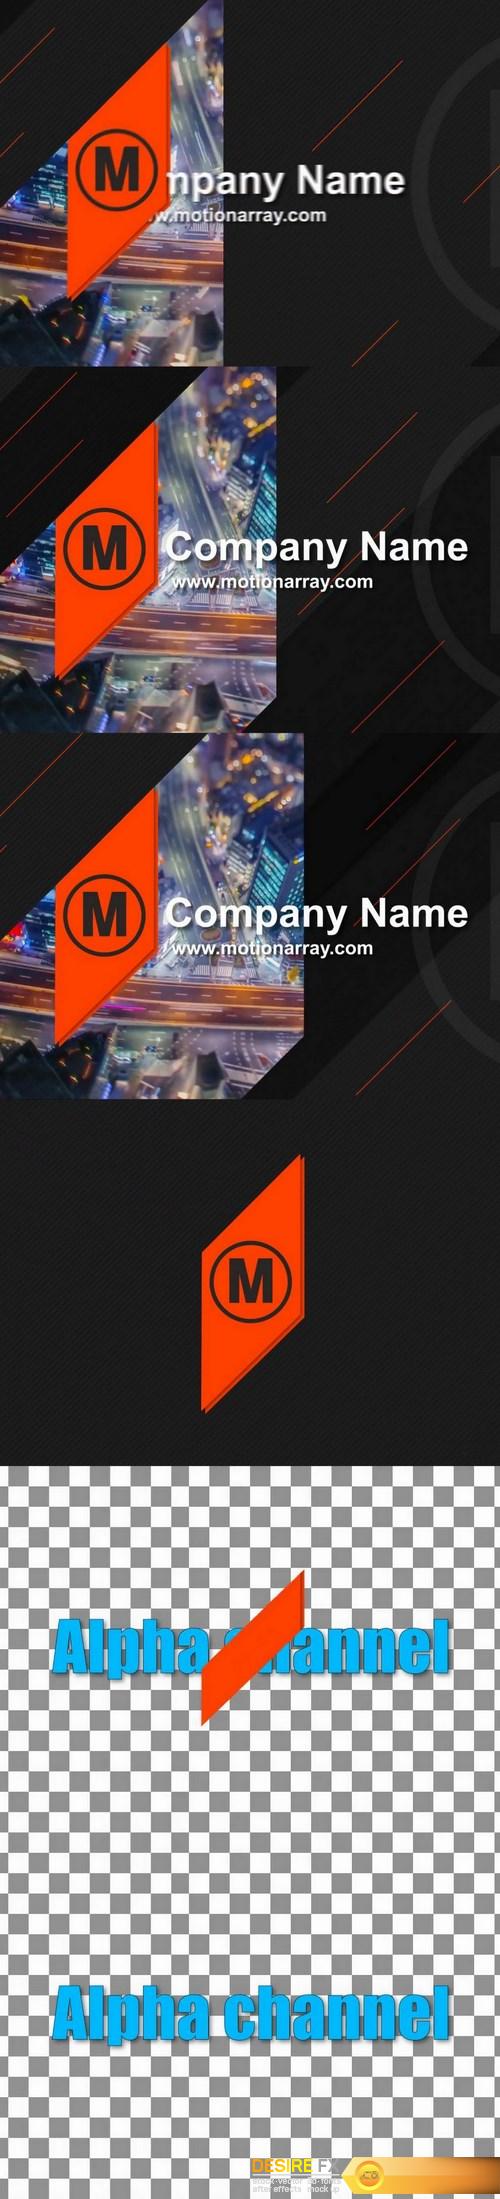 Company-name-project-34969